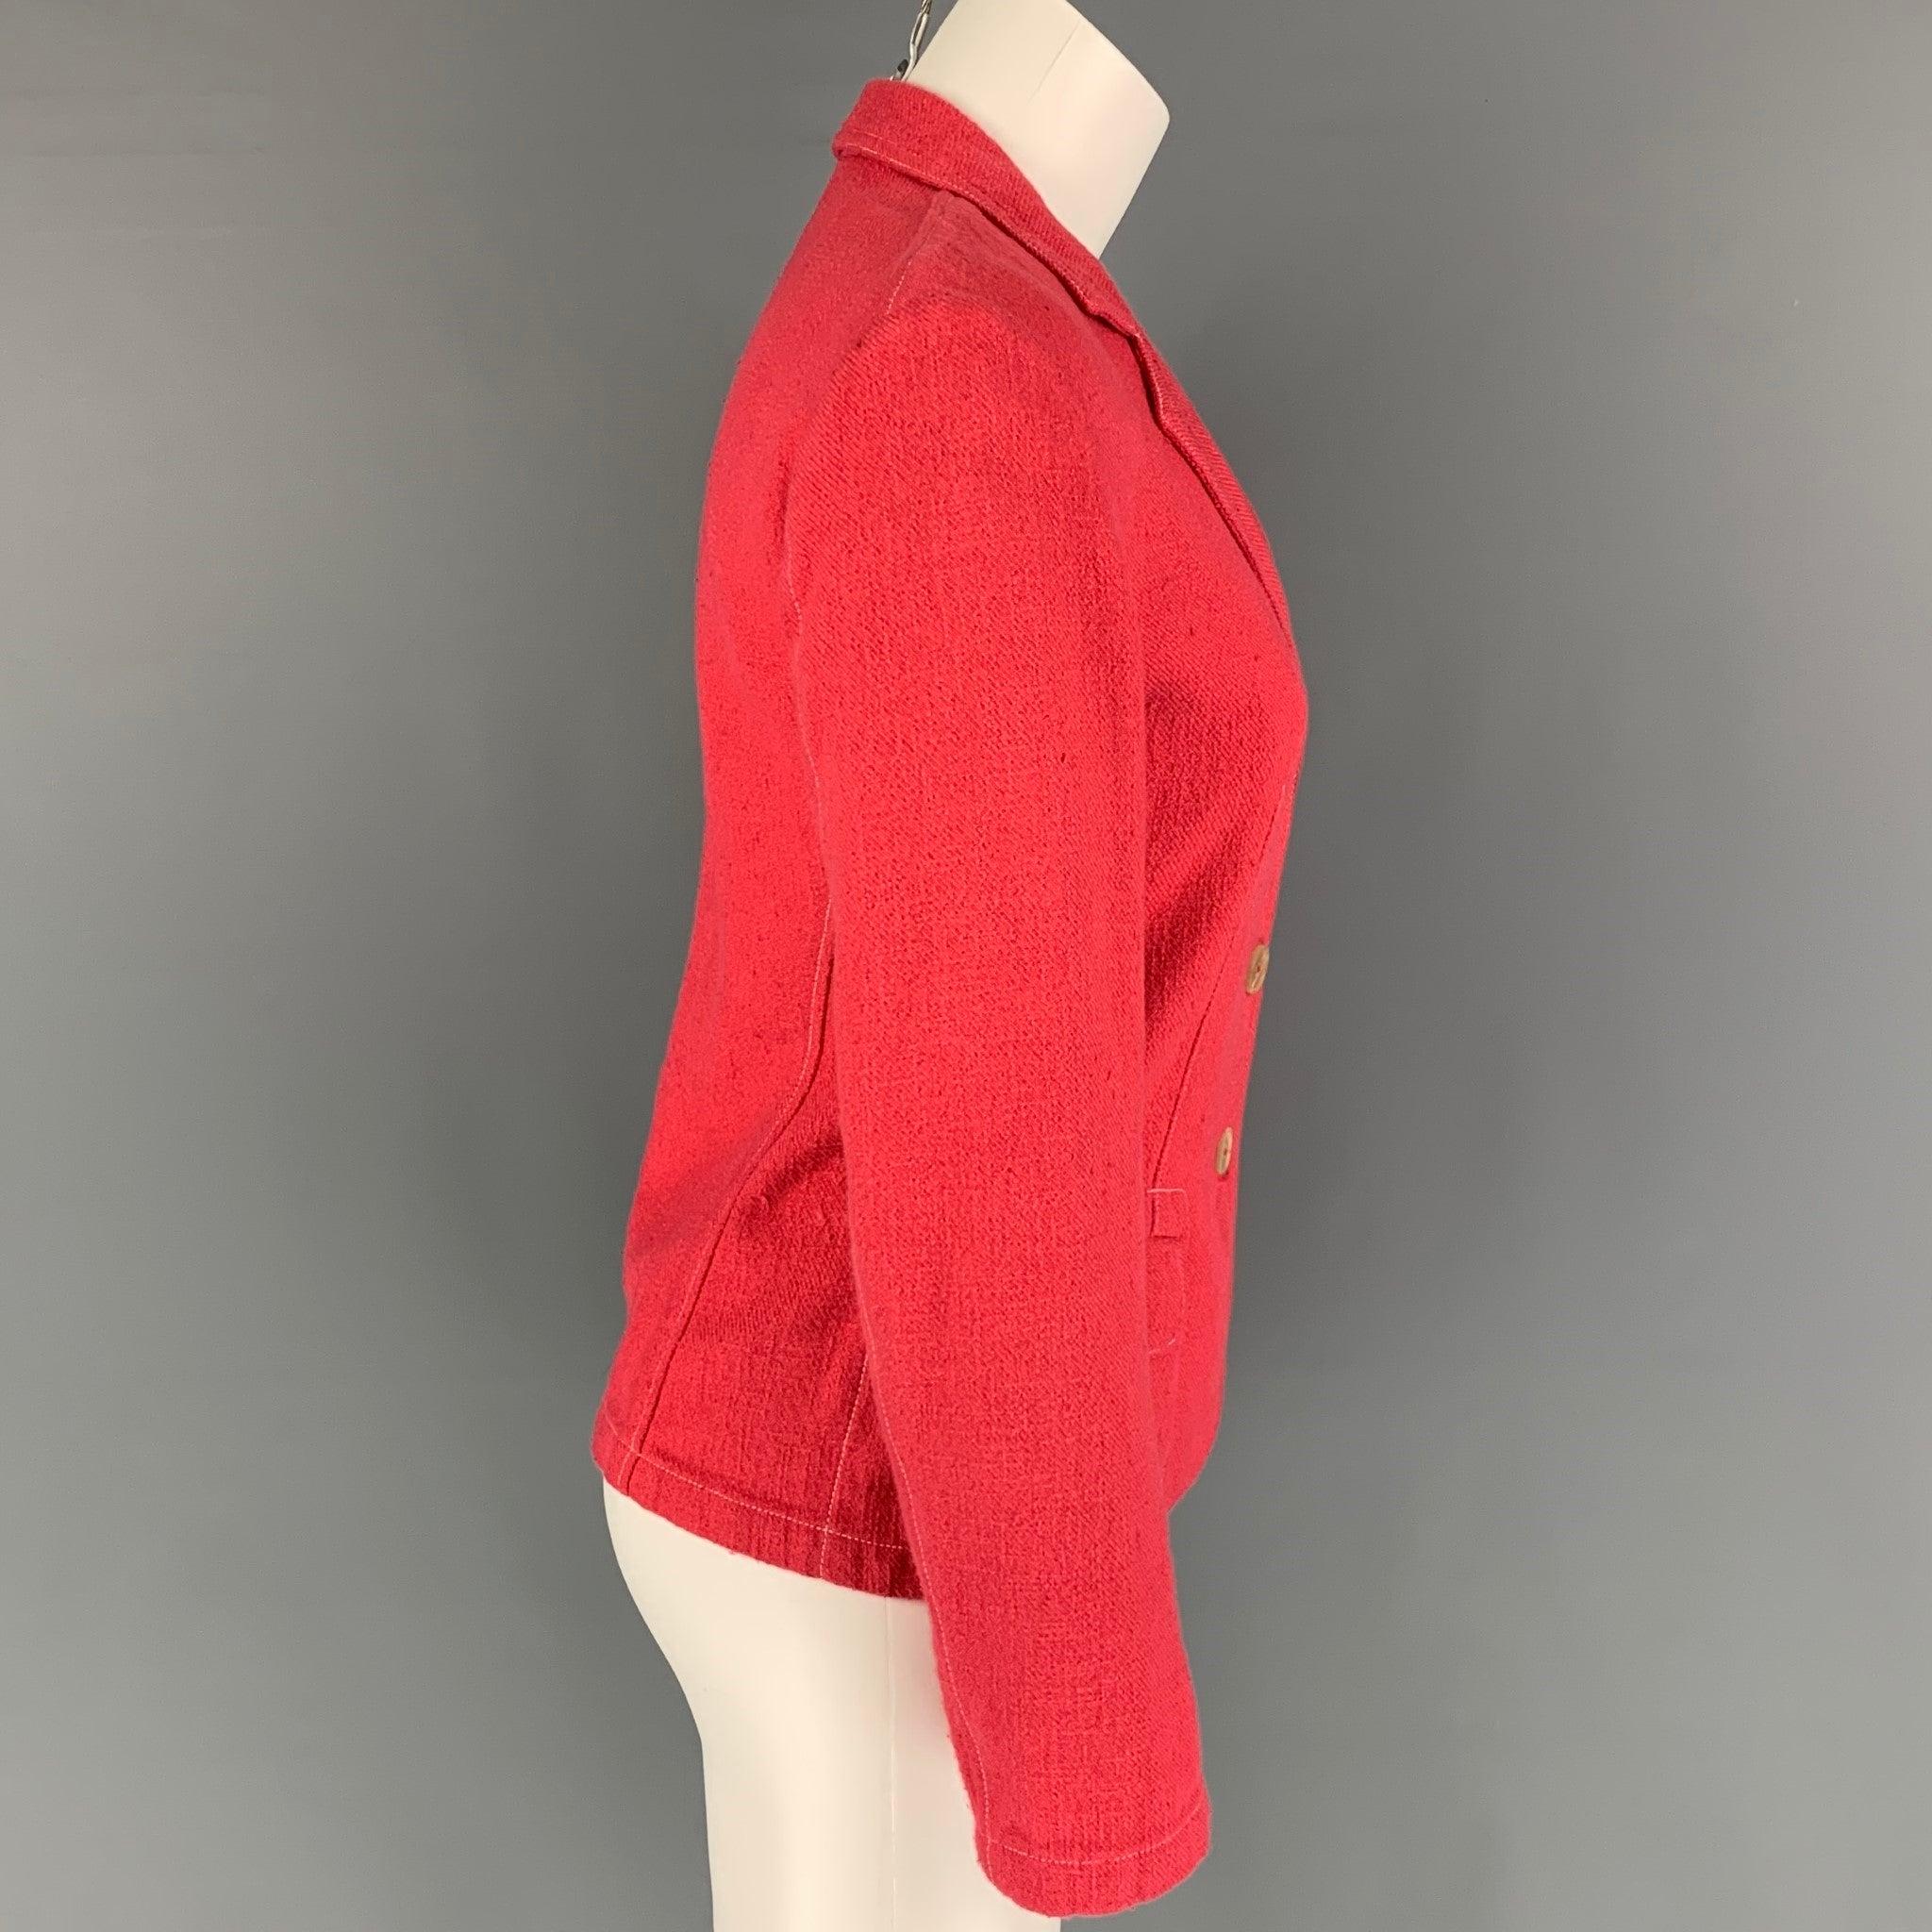 JIL SANDER jacket blazer comes in a coral cotton / linen featuring a notch lapel, contrast stitching, flap pockets, and a three button closure.
Very Good Pre-Owned Condition. 

Marked:   34 

Measurements: 
 
Shoulder: 17 inches  Bust: 32 inches 